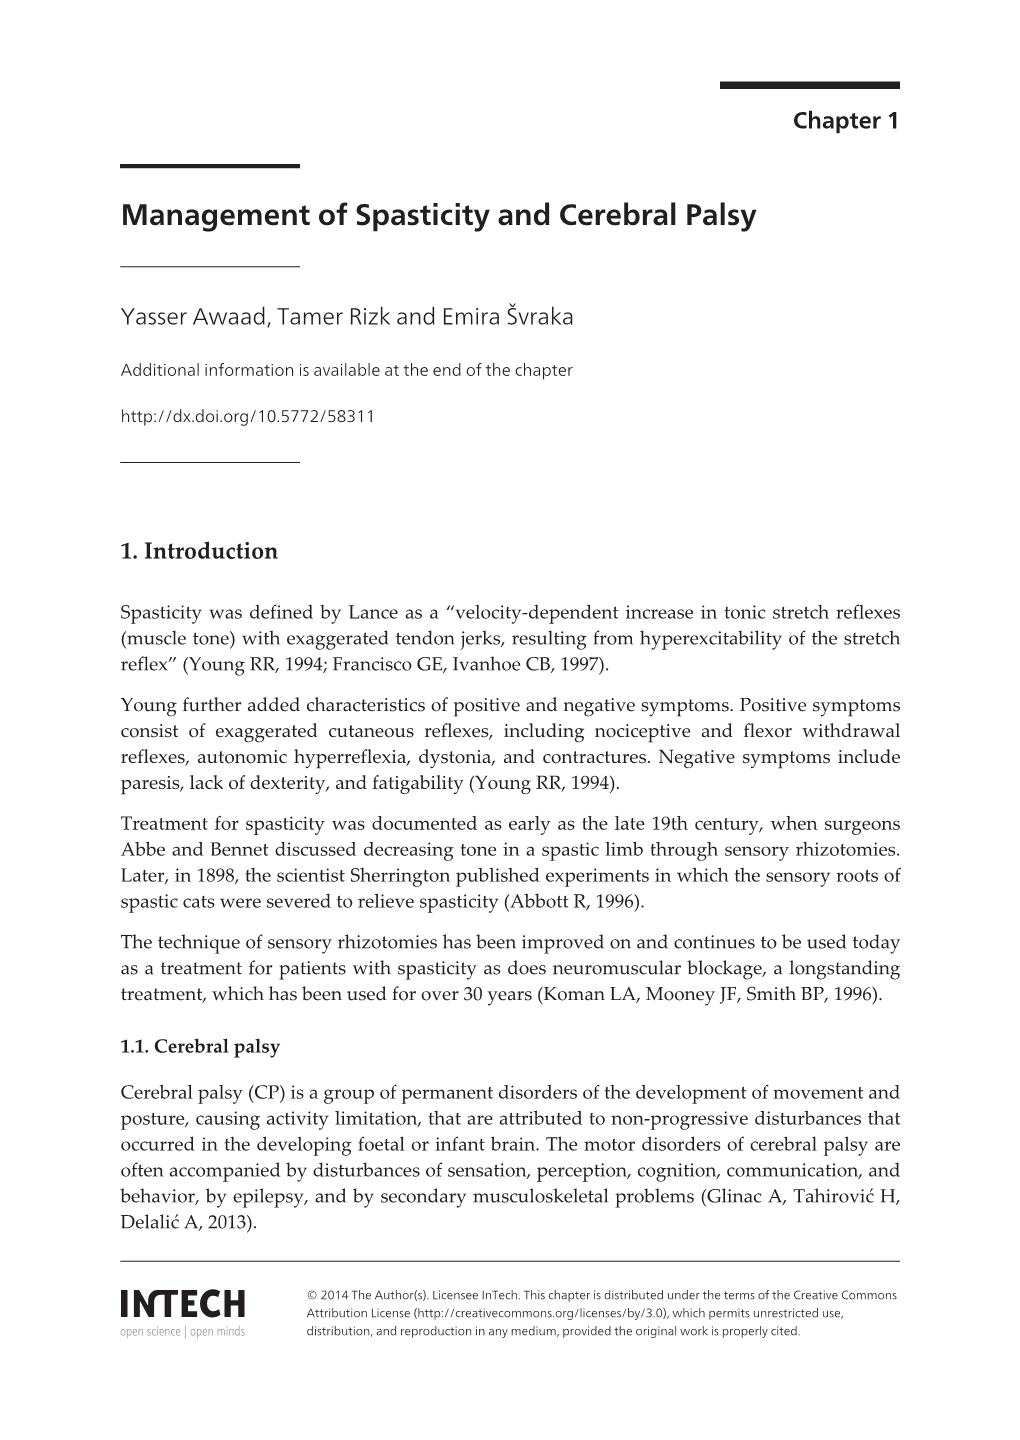 Management of Spasticity and Cerebral Palsy